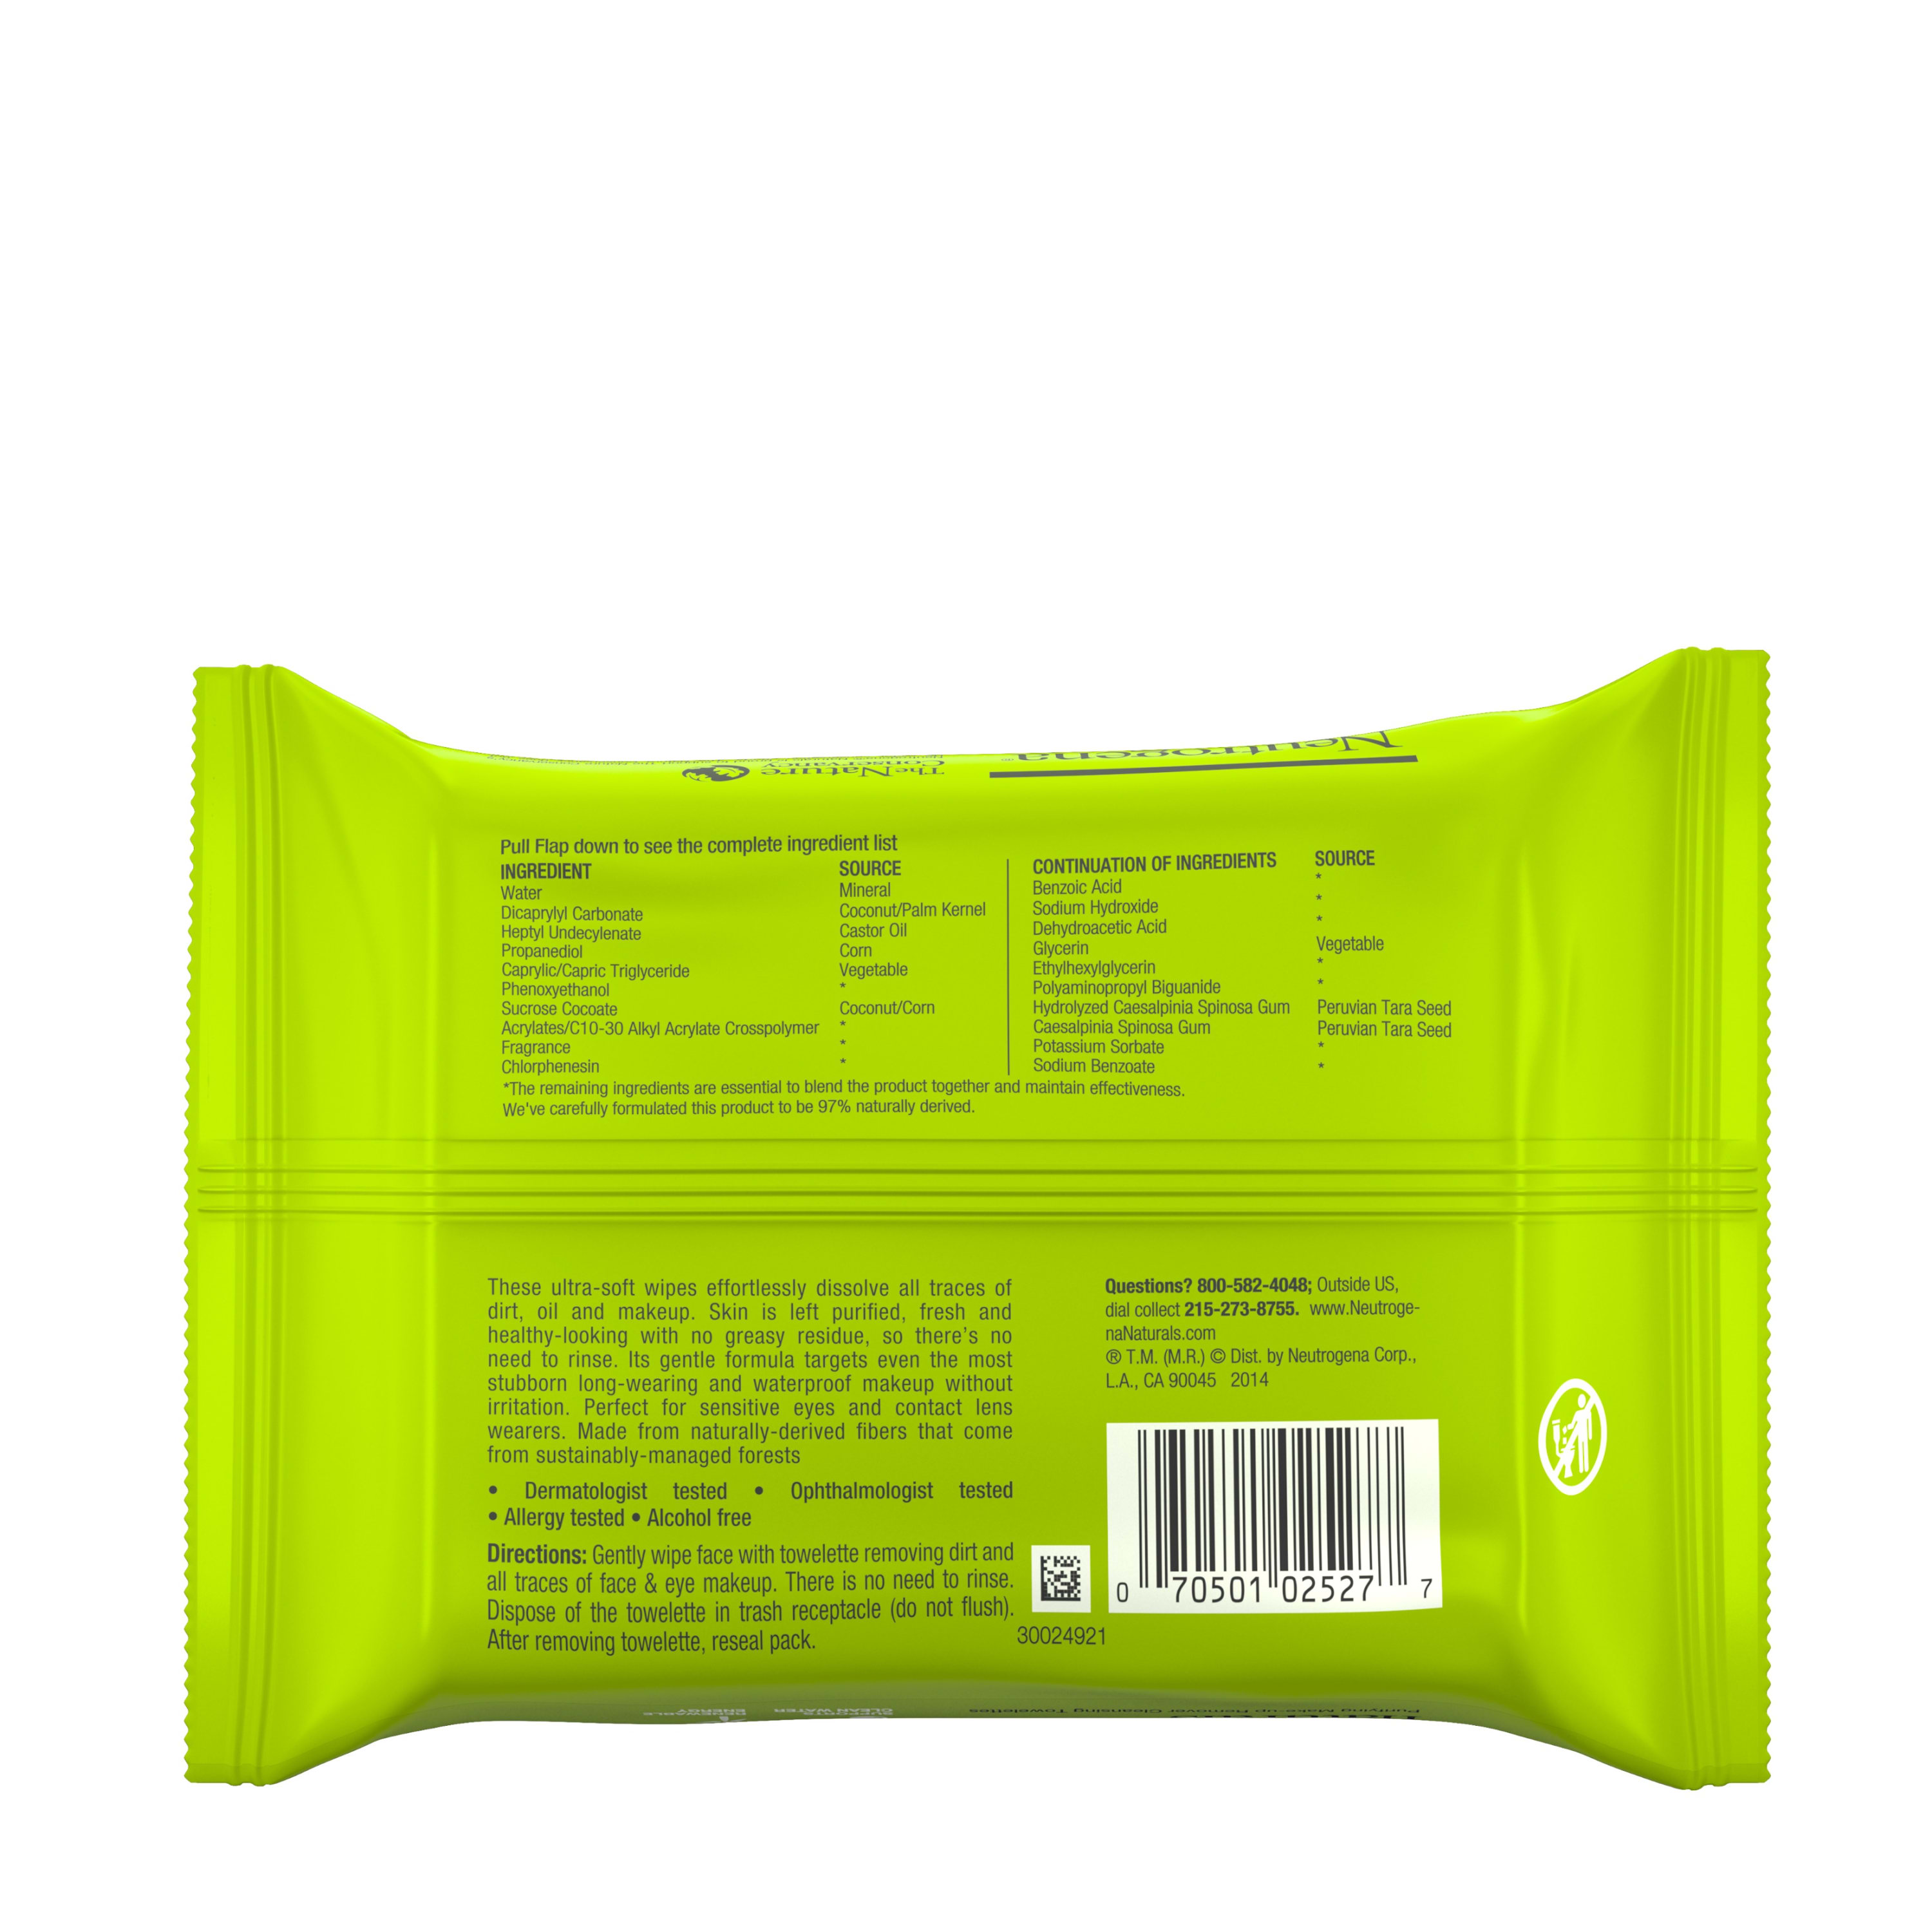 Neutrogena Naturals Purifying Makeup Remover Cleansing Wipes, 25 ct. - image 2 of 9